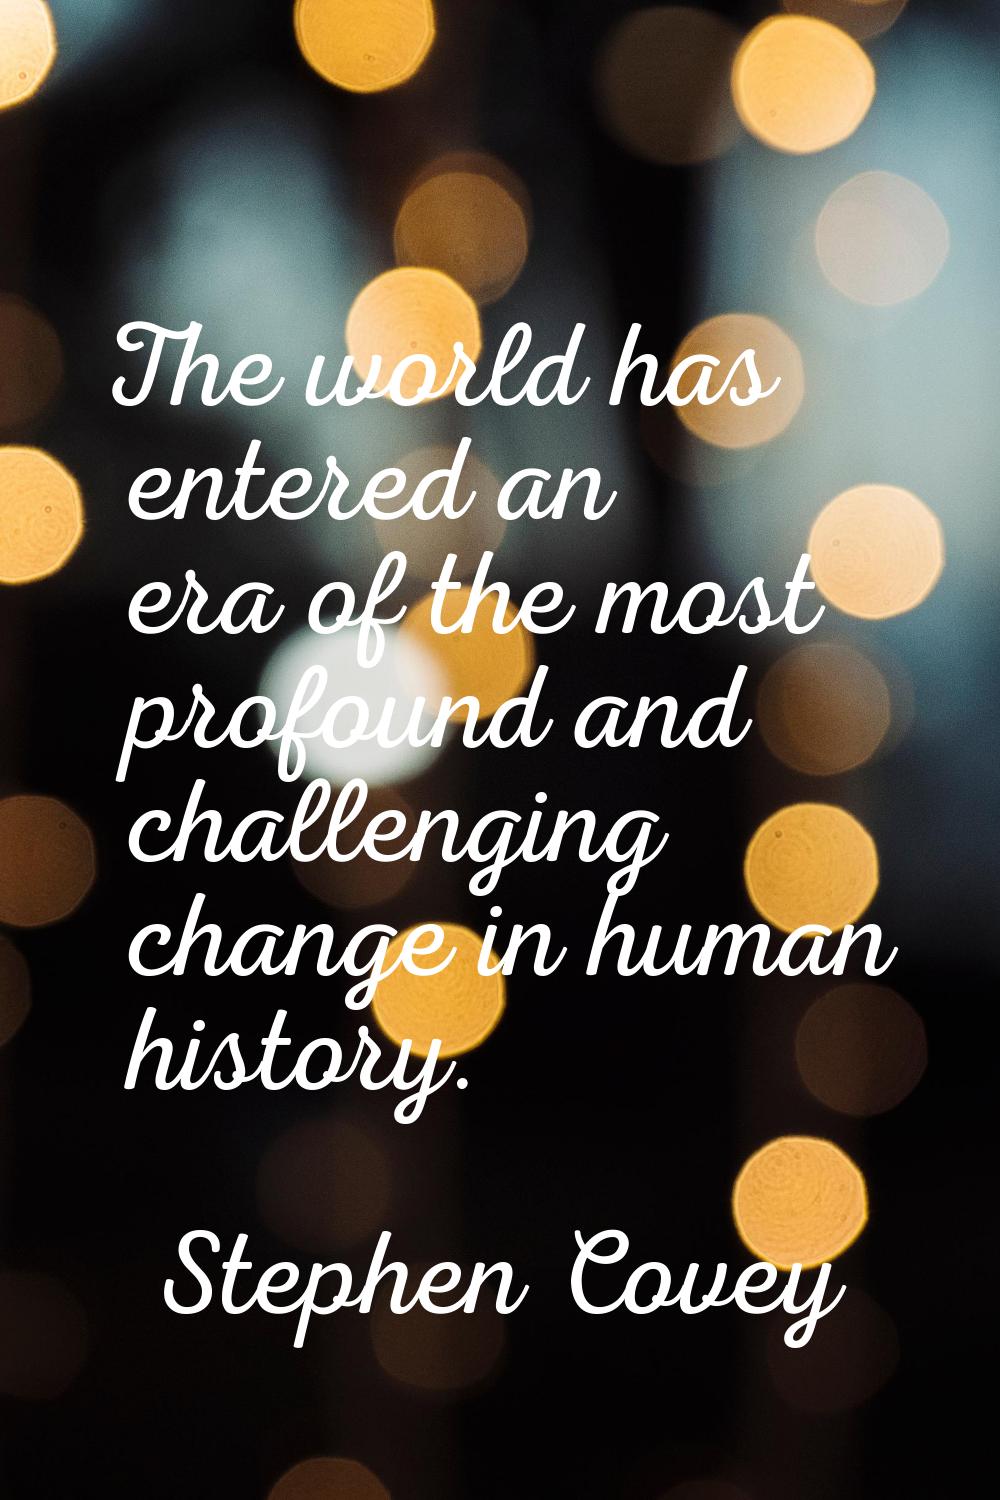 The world has entered an era of the most profound and challenging change in human history.